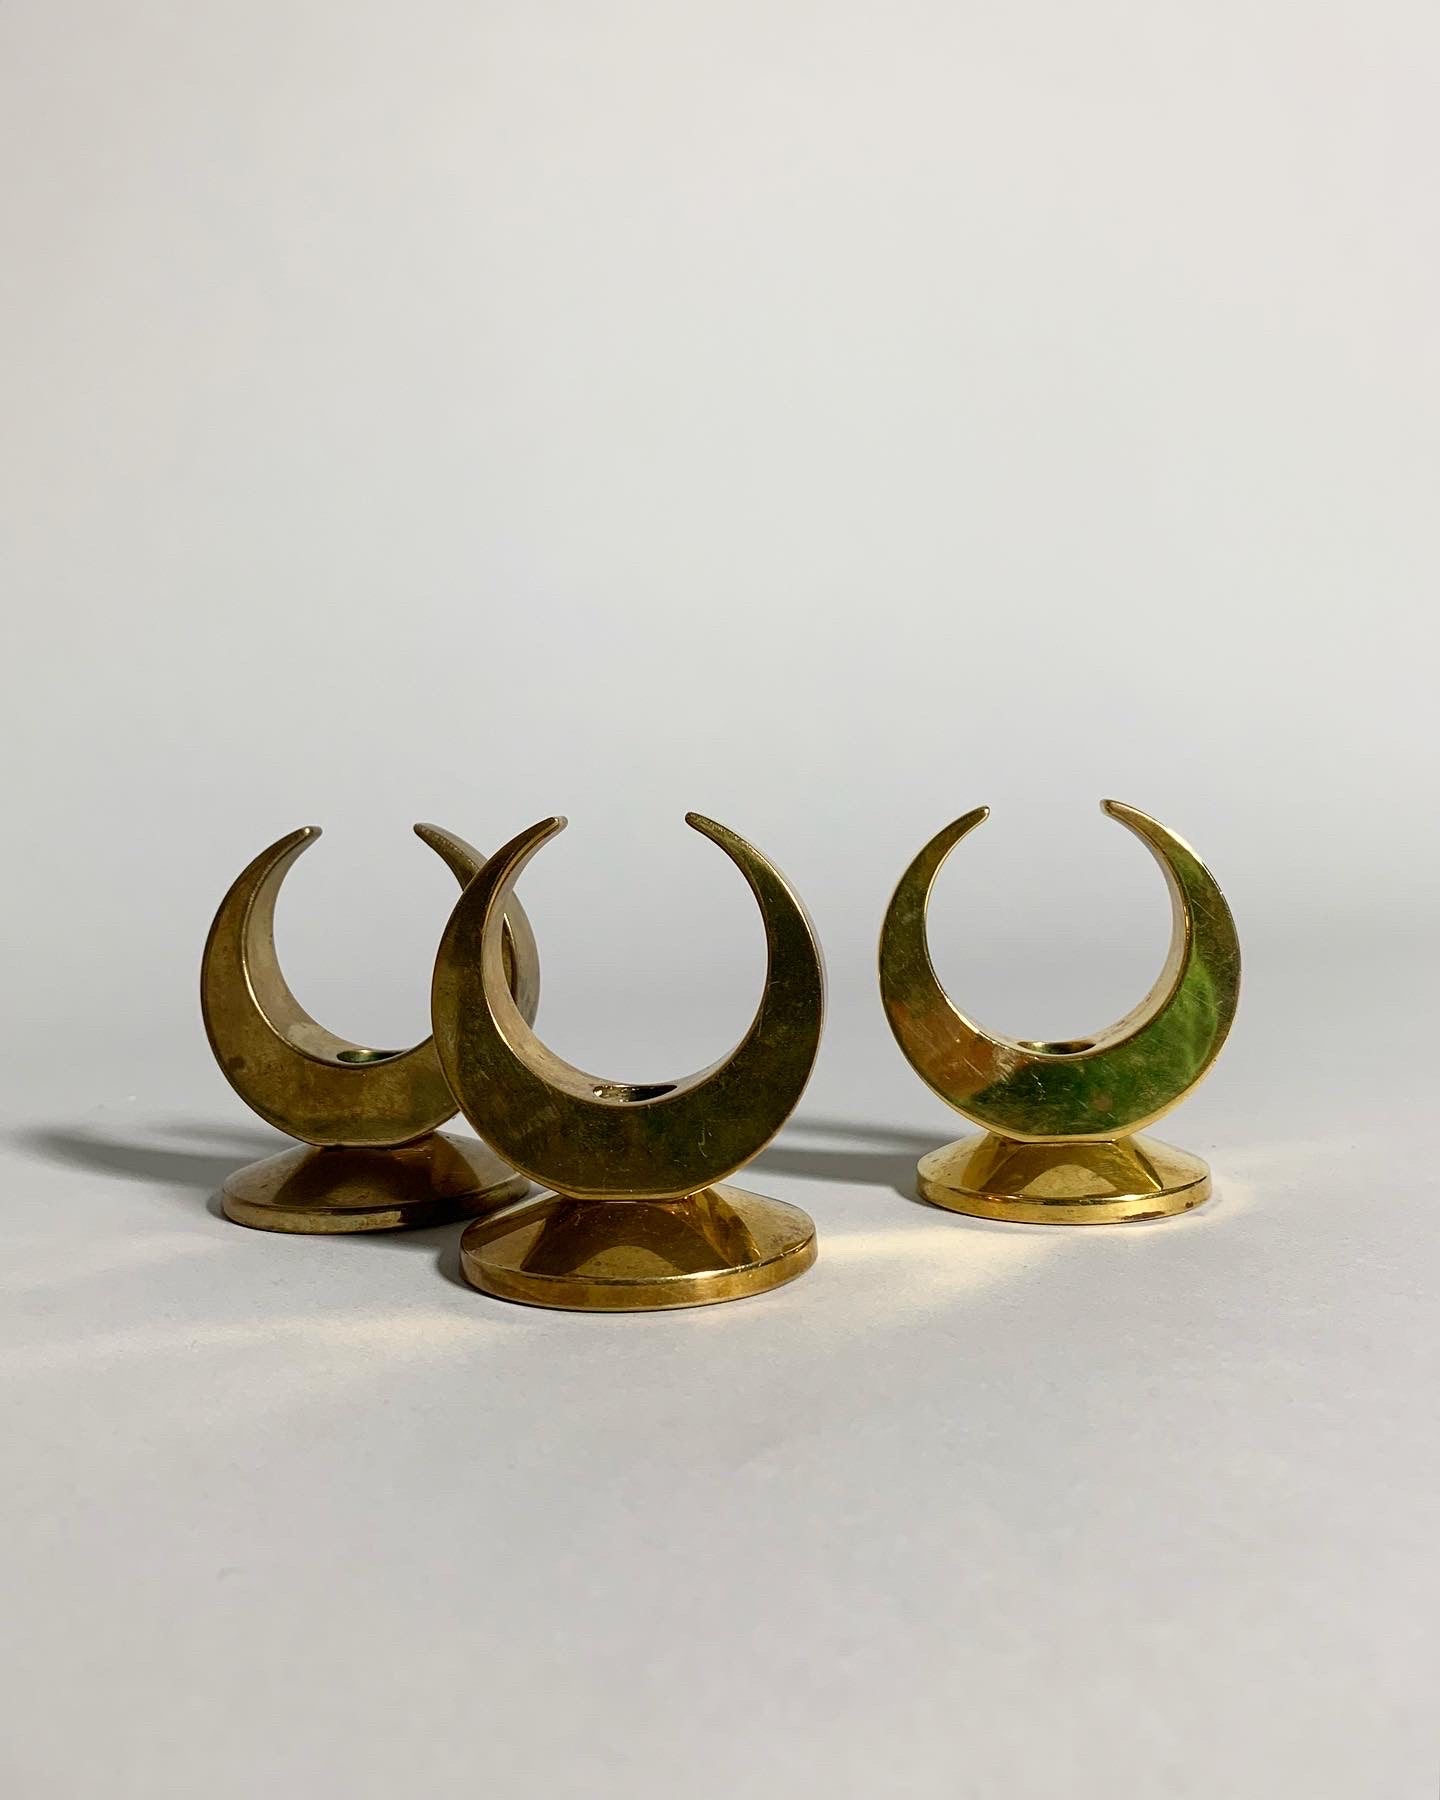 Set of three Arthur Pettersson moon candle holders in solid brass, hand-crafted in Kolbäck, Sweden in the 1960s.

Brass nicely aged with minor scratches here and there. The right one is slightly brighter with less patina.

Height: 7 cm
Width: 6